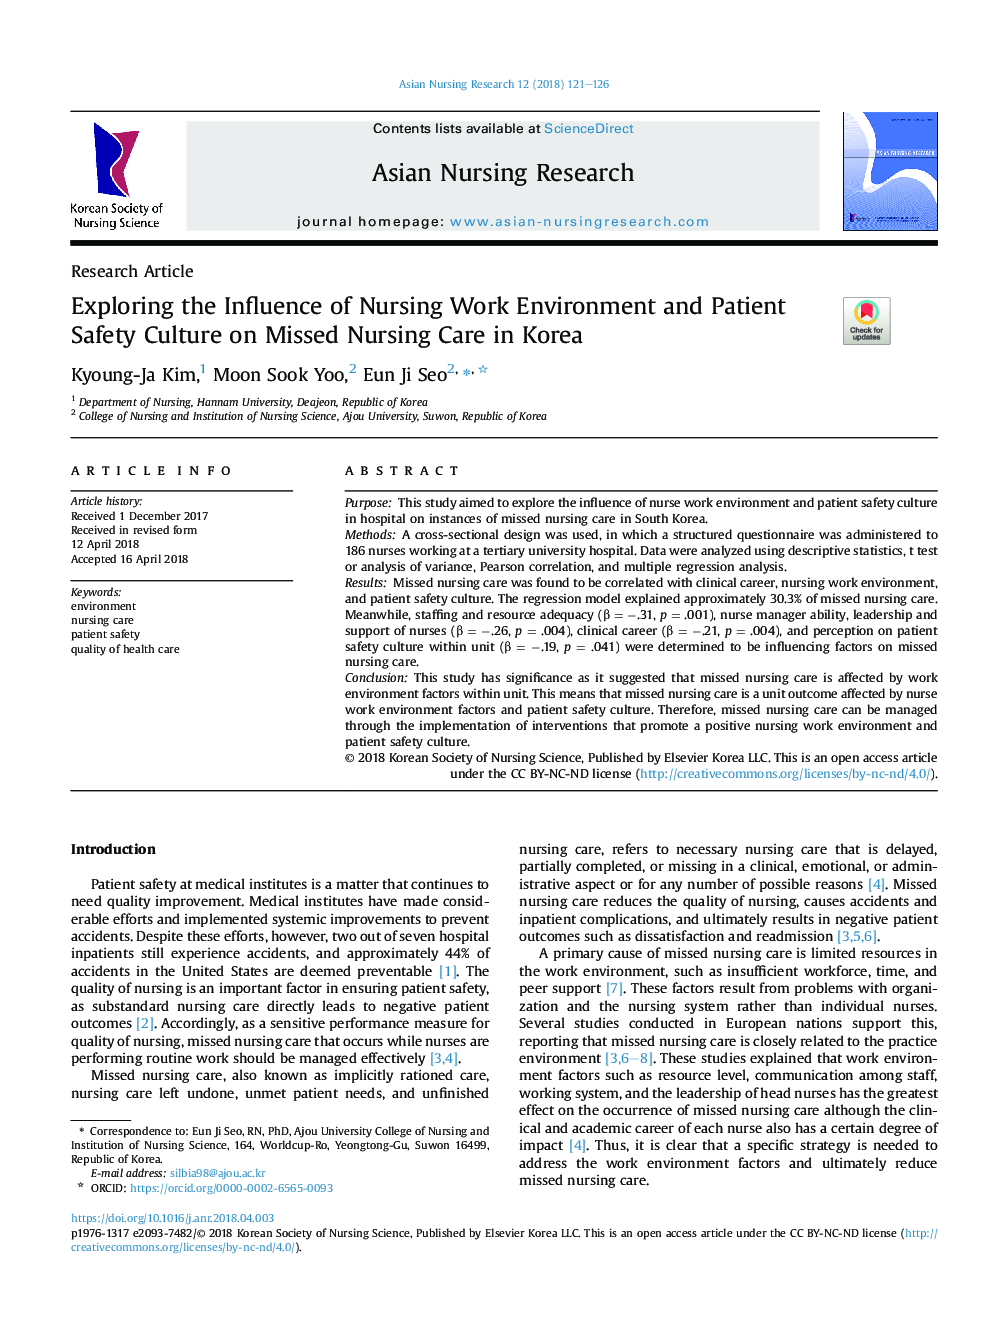 Exploring the Influence of Nursing Work Environment and Patient Safety Culture on Missed Nursing Care in Korea